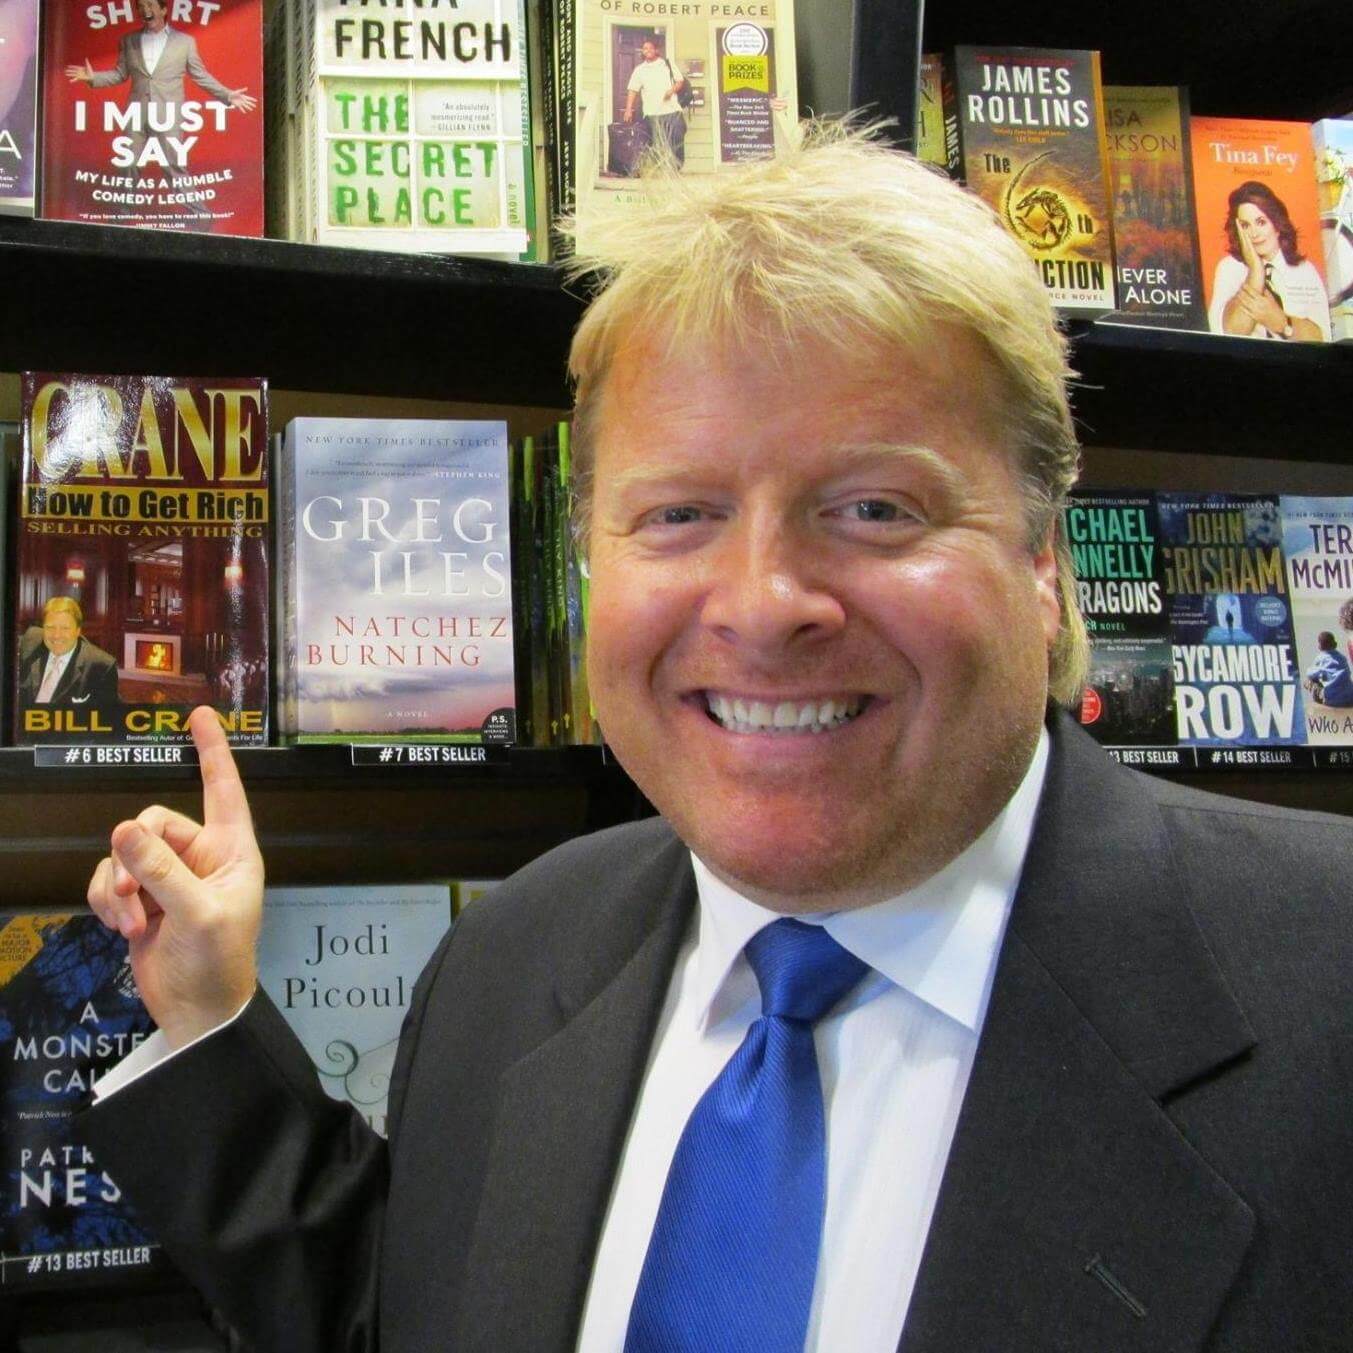 Author Bill Crane Pointing to his Bestselling Book Generating Clients For Life on the shelf at Hudson Booksellers LAX, Los Angeles International Airport